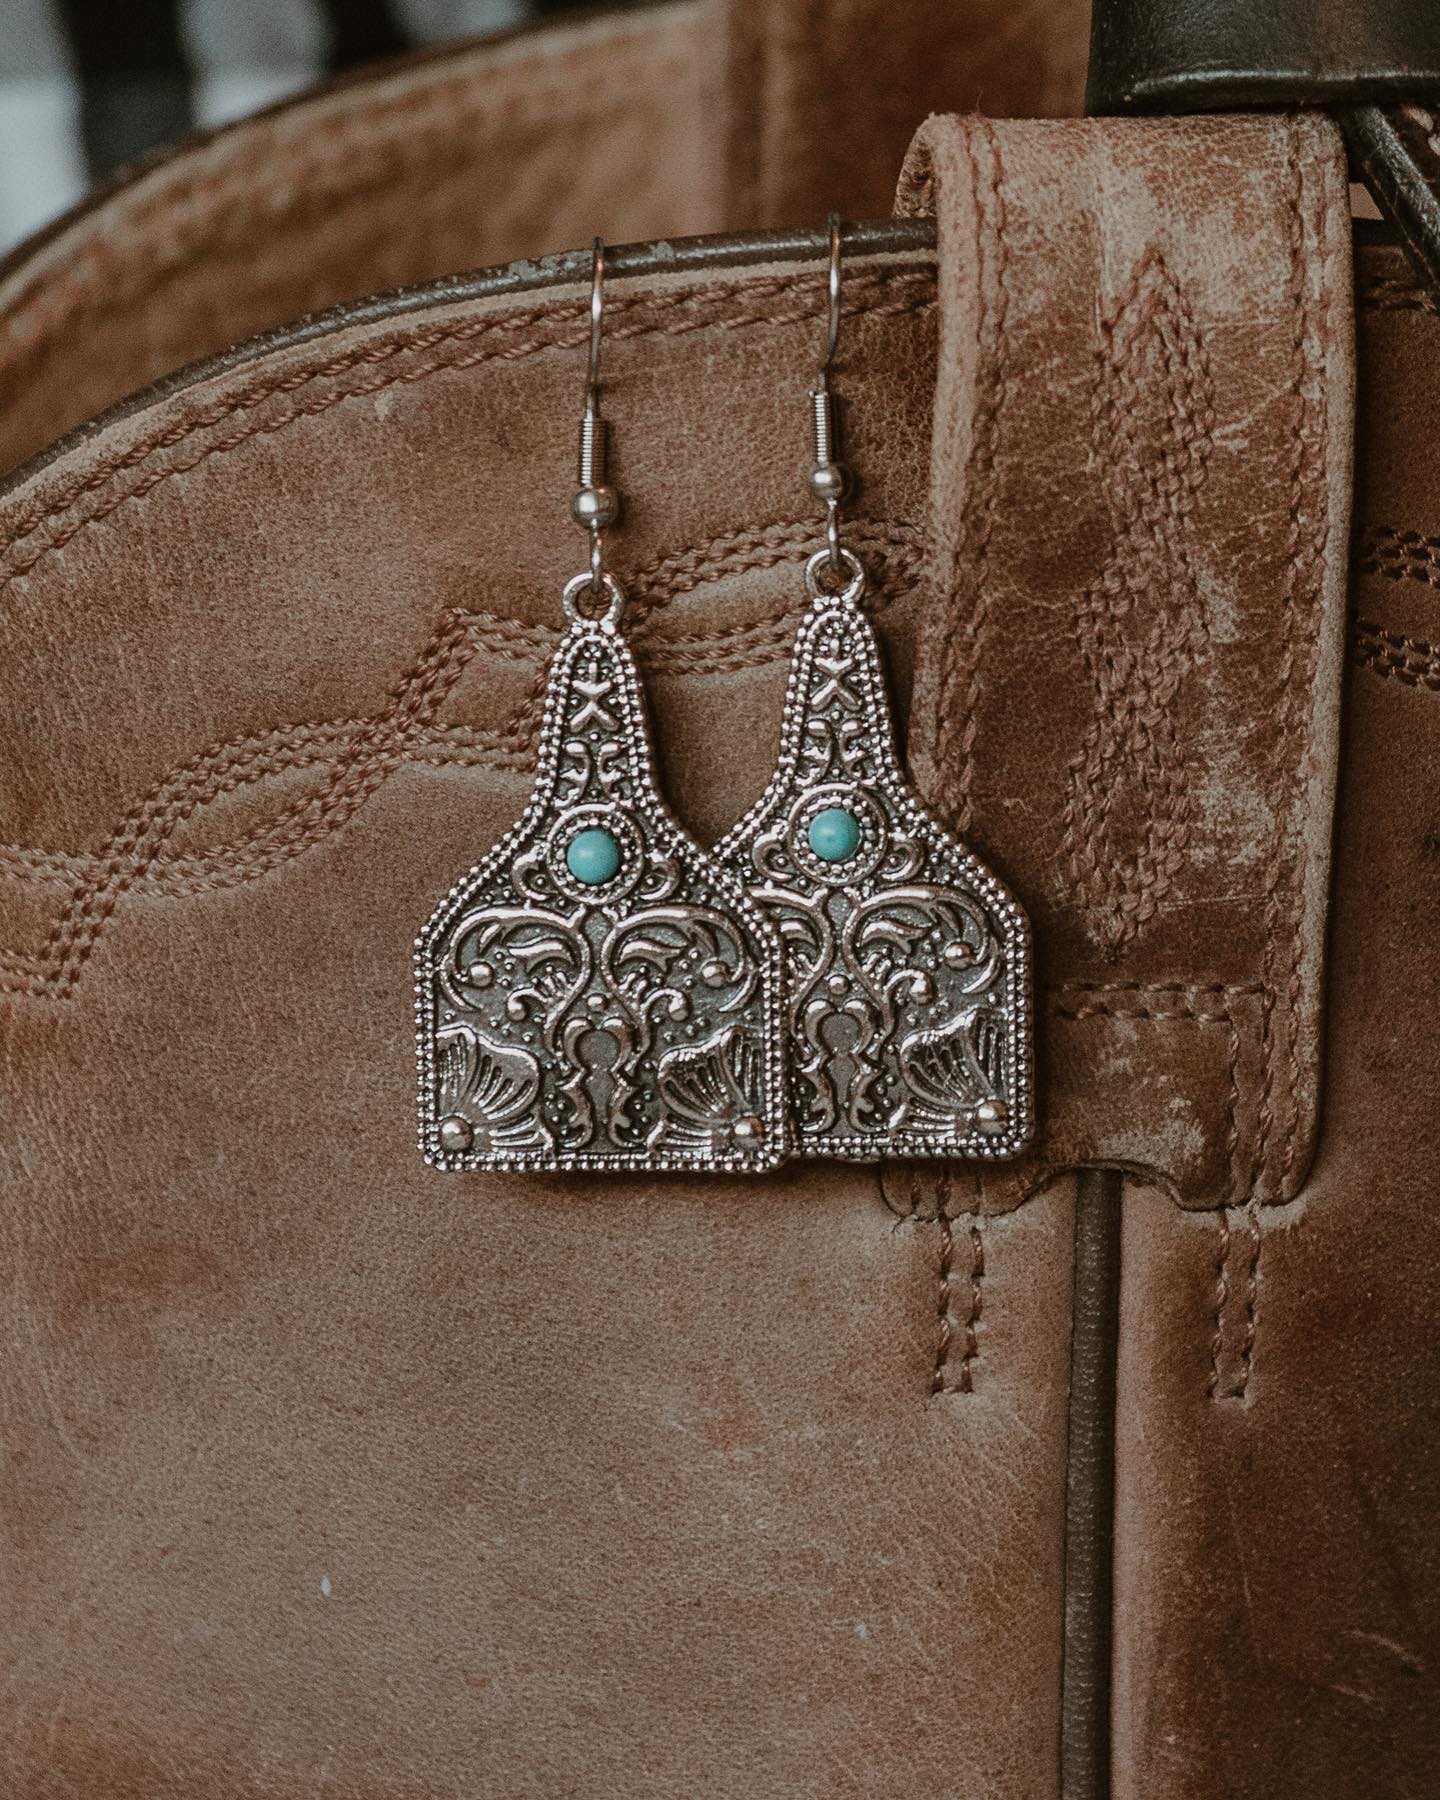 Handcrafted Stamped Metal Cattle Tag Earrings